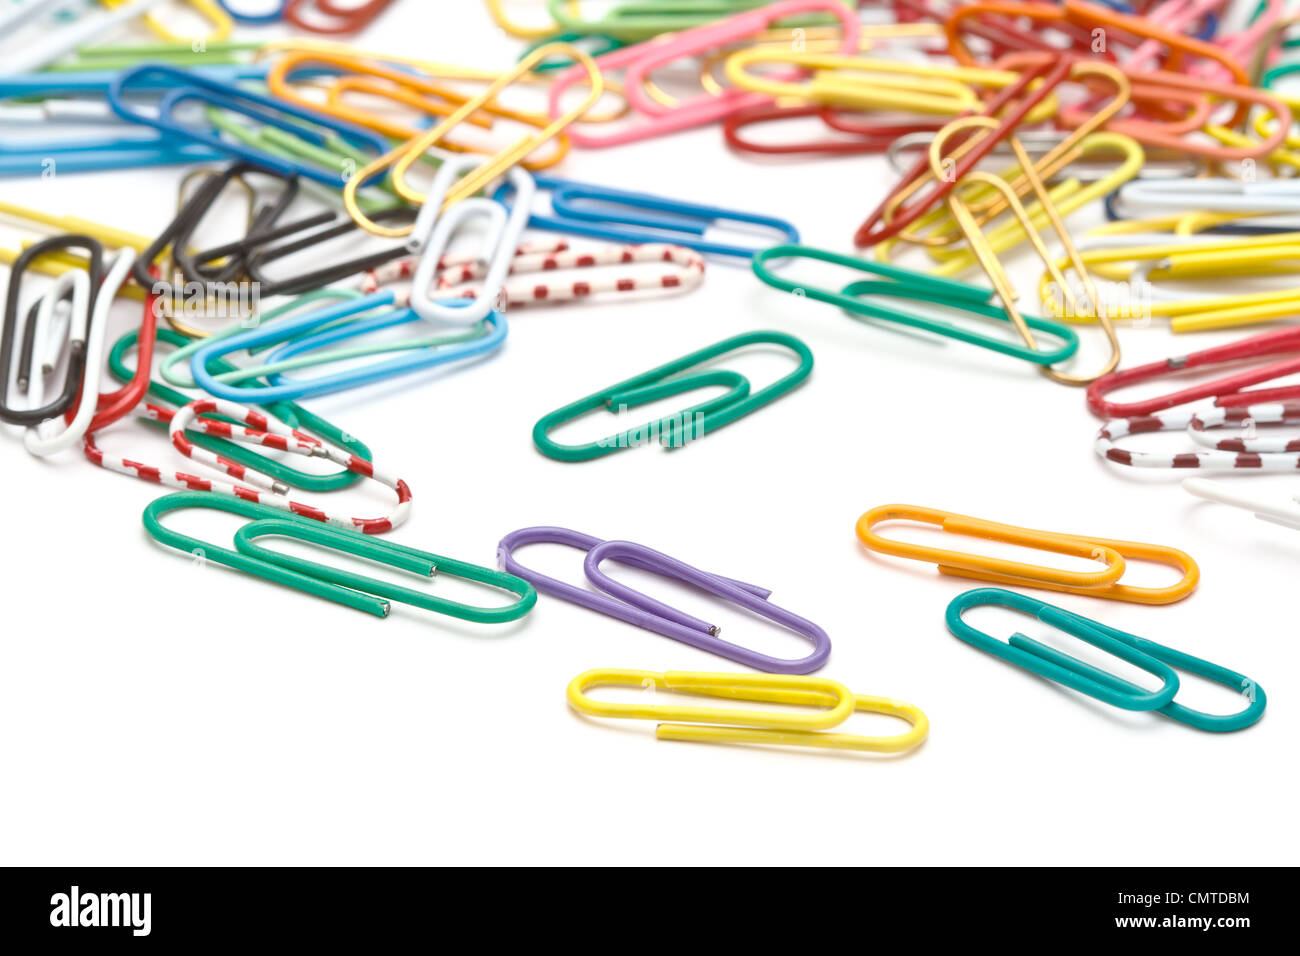 Colorful office paper clips closeup on white Stock Photo